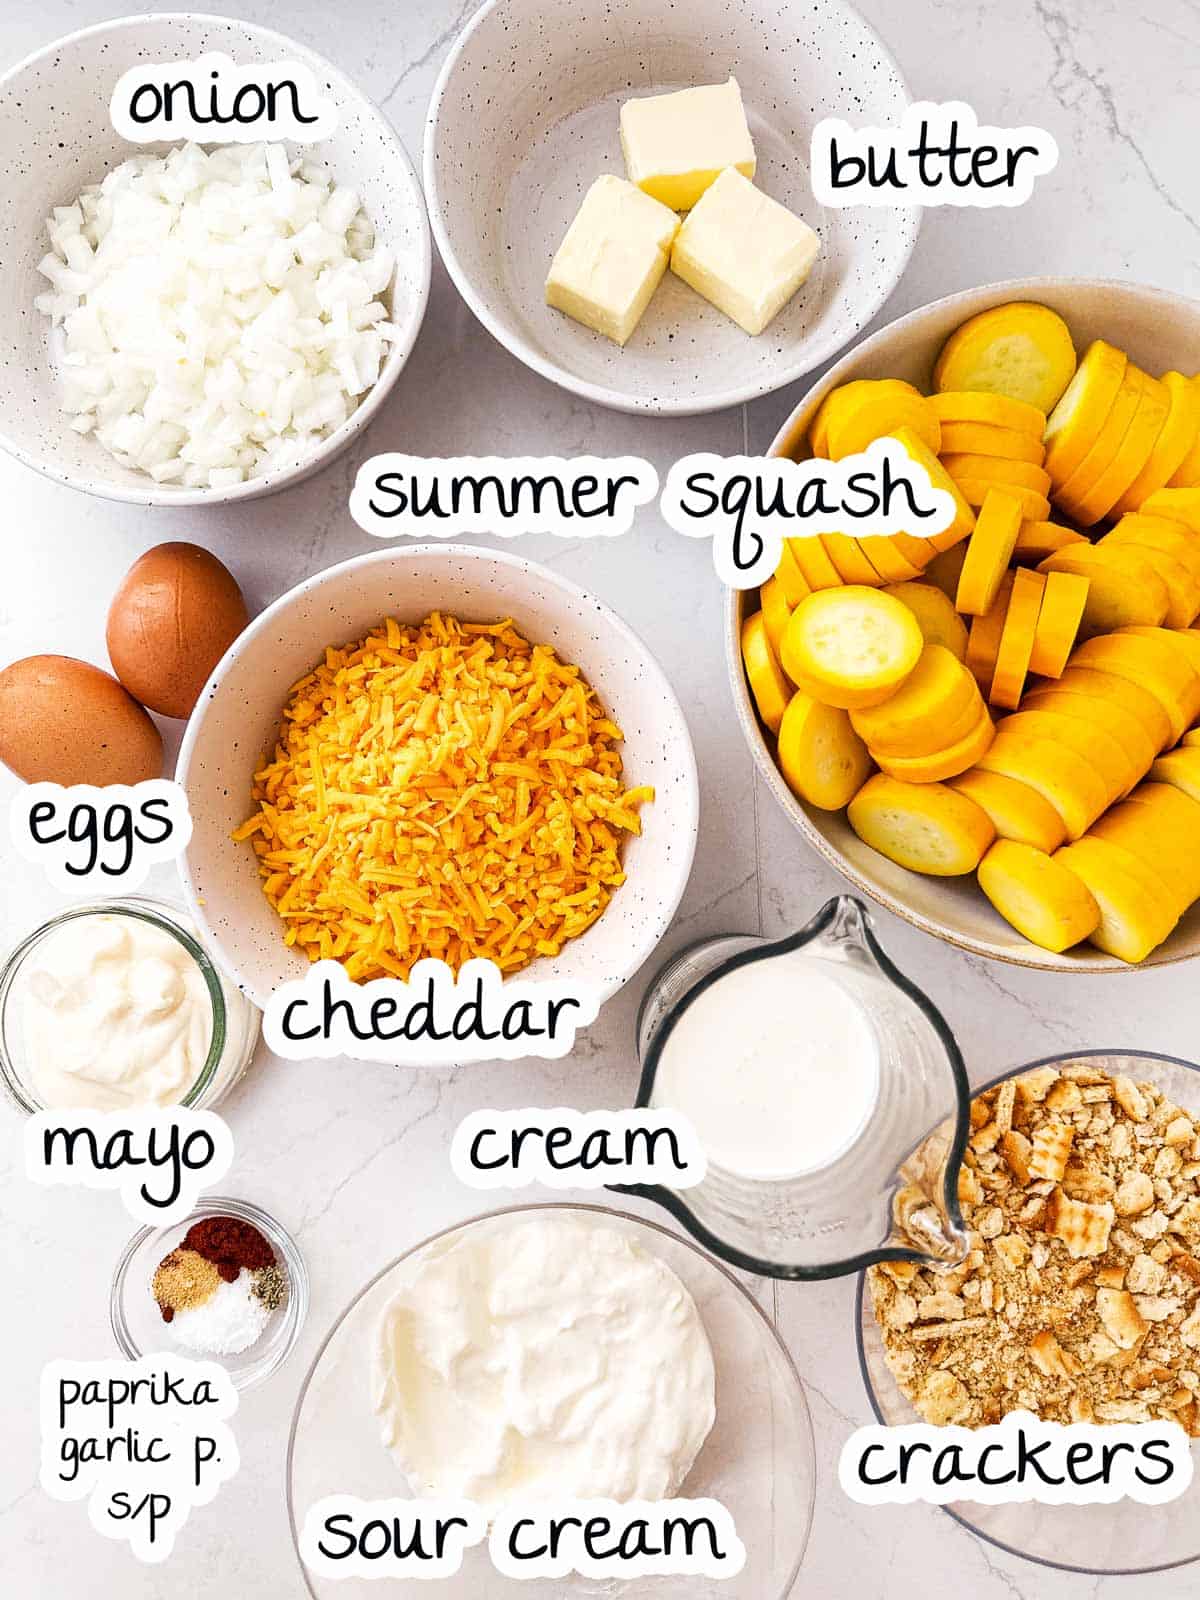 ingredients for squash casserole with text labels